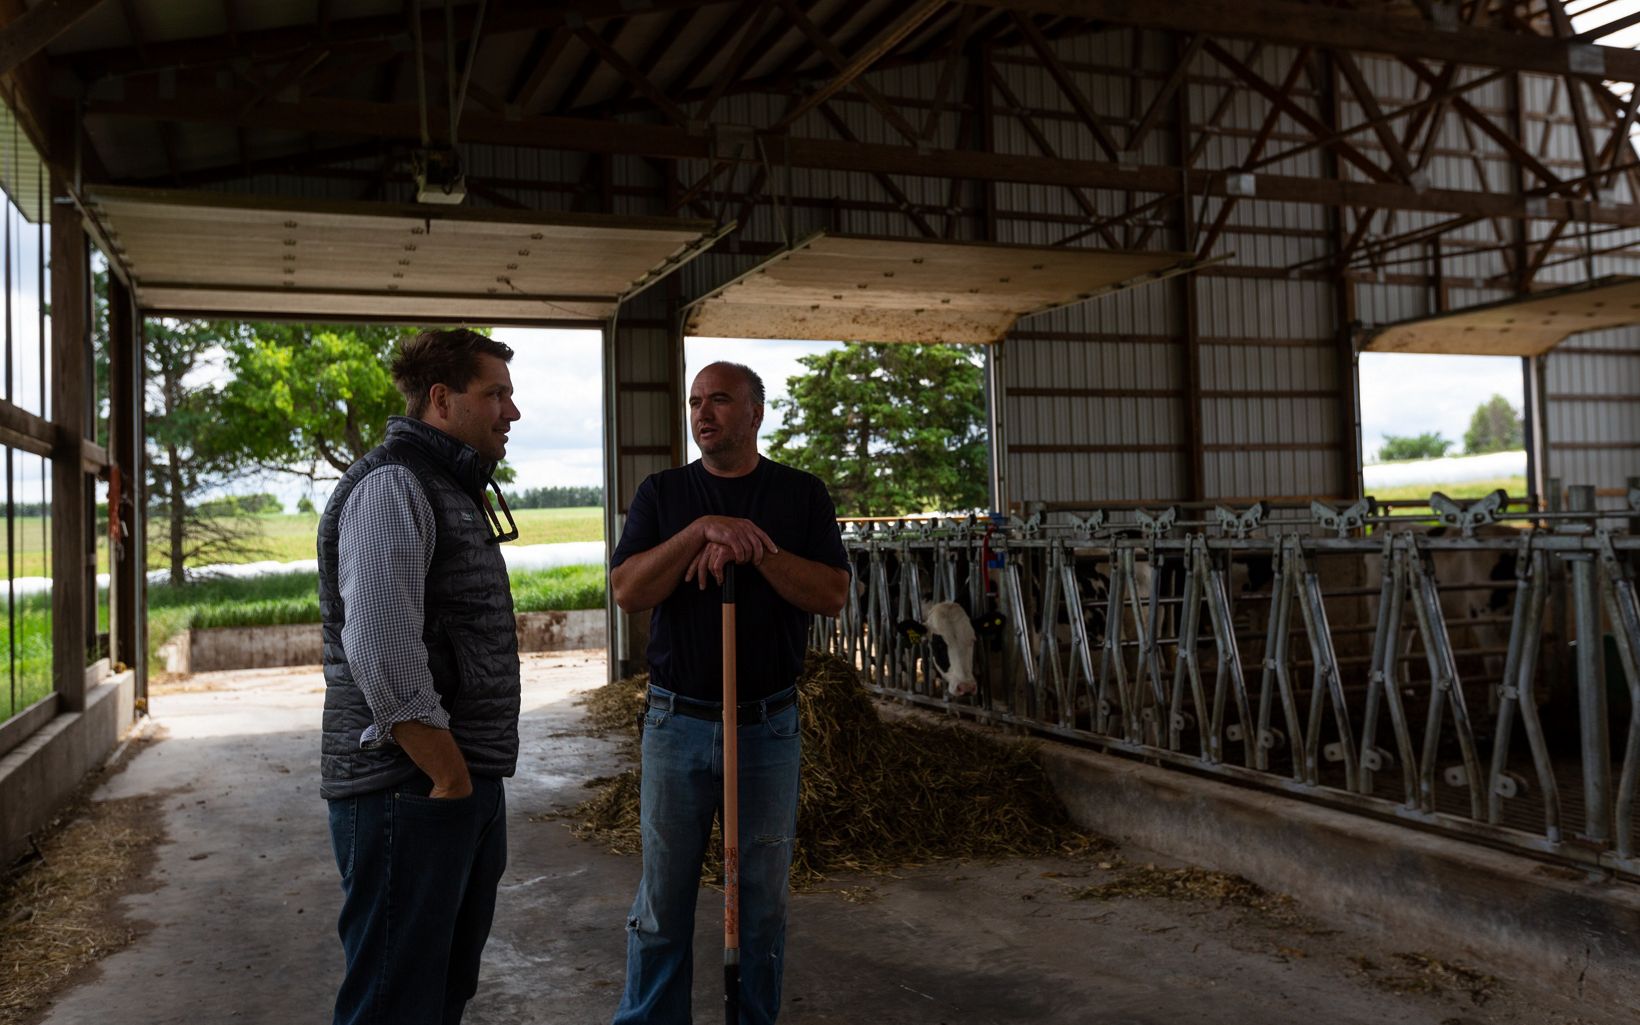 Two people standing and talking in a dairy barn.